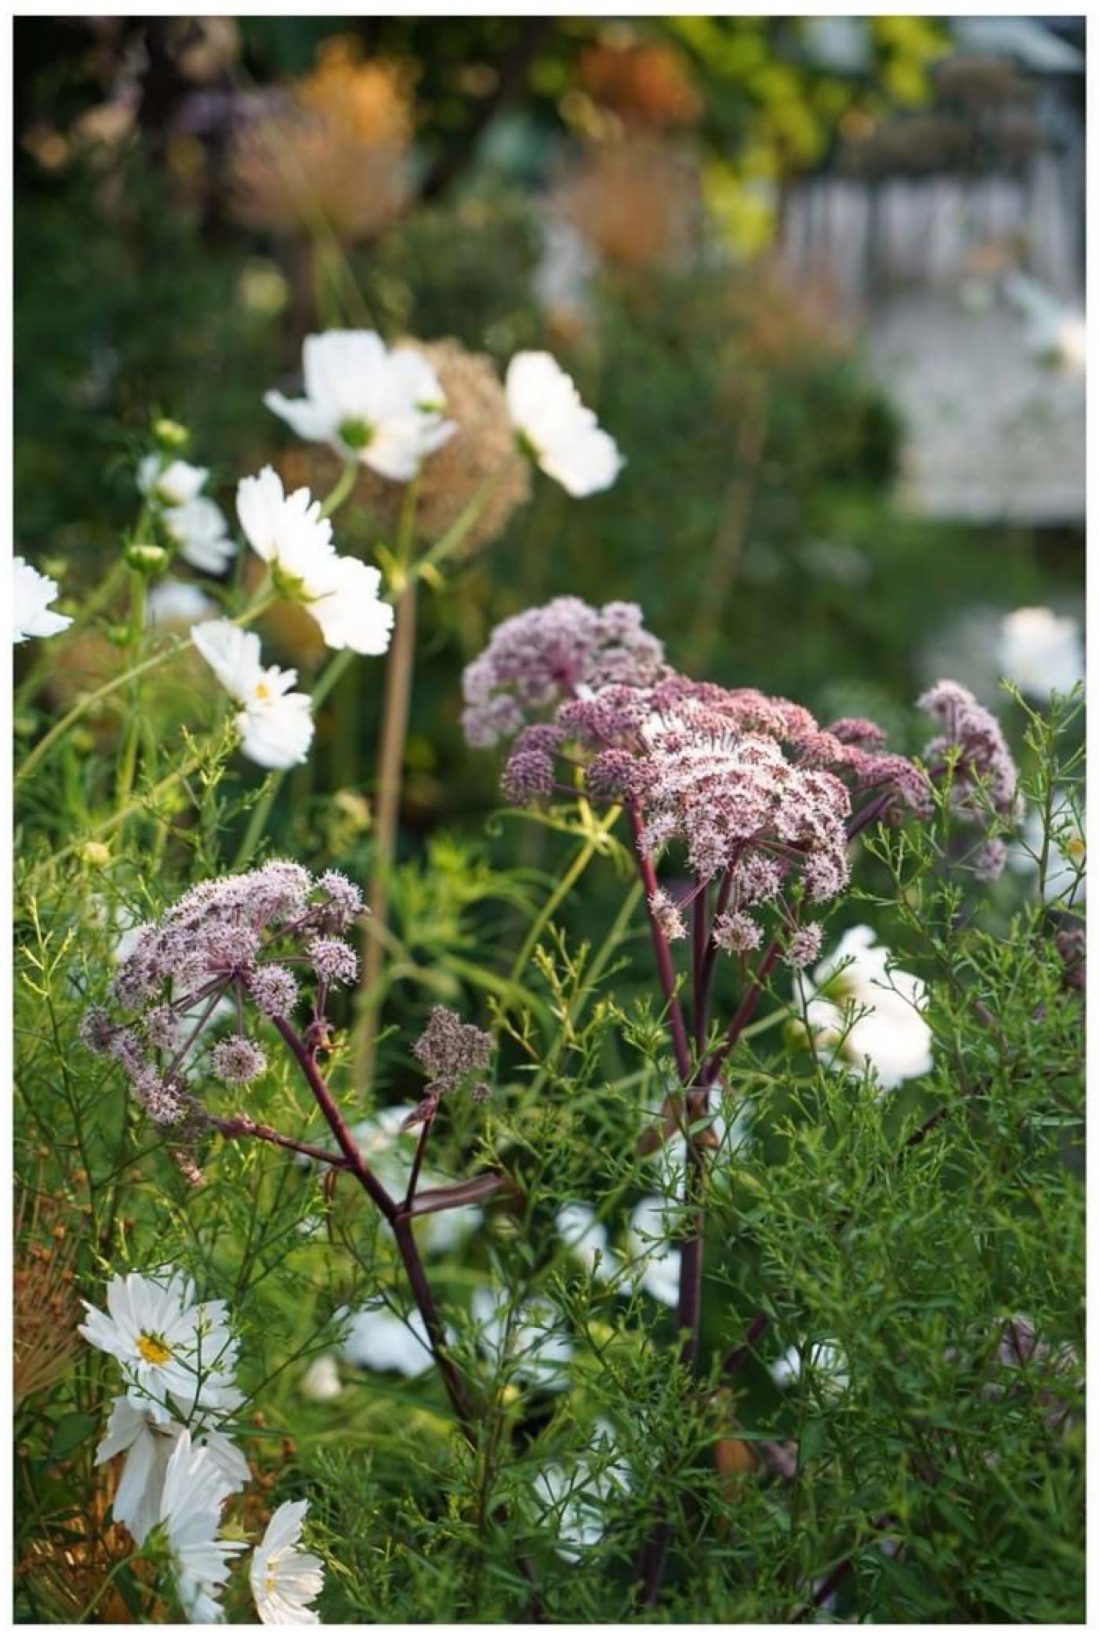 Cosmos and Angelica gigas image by @farlamandchandler